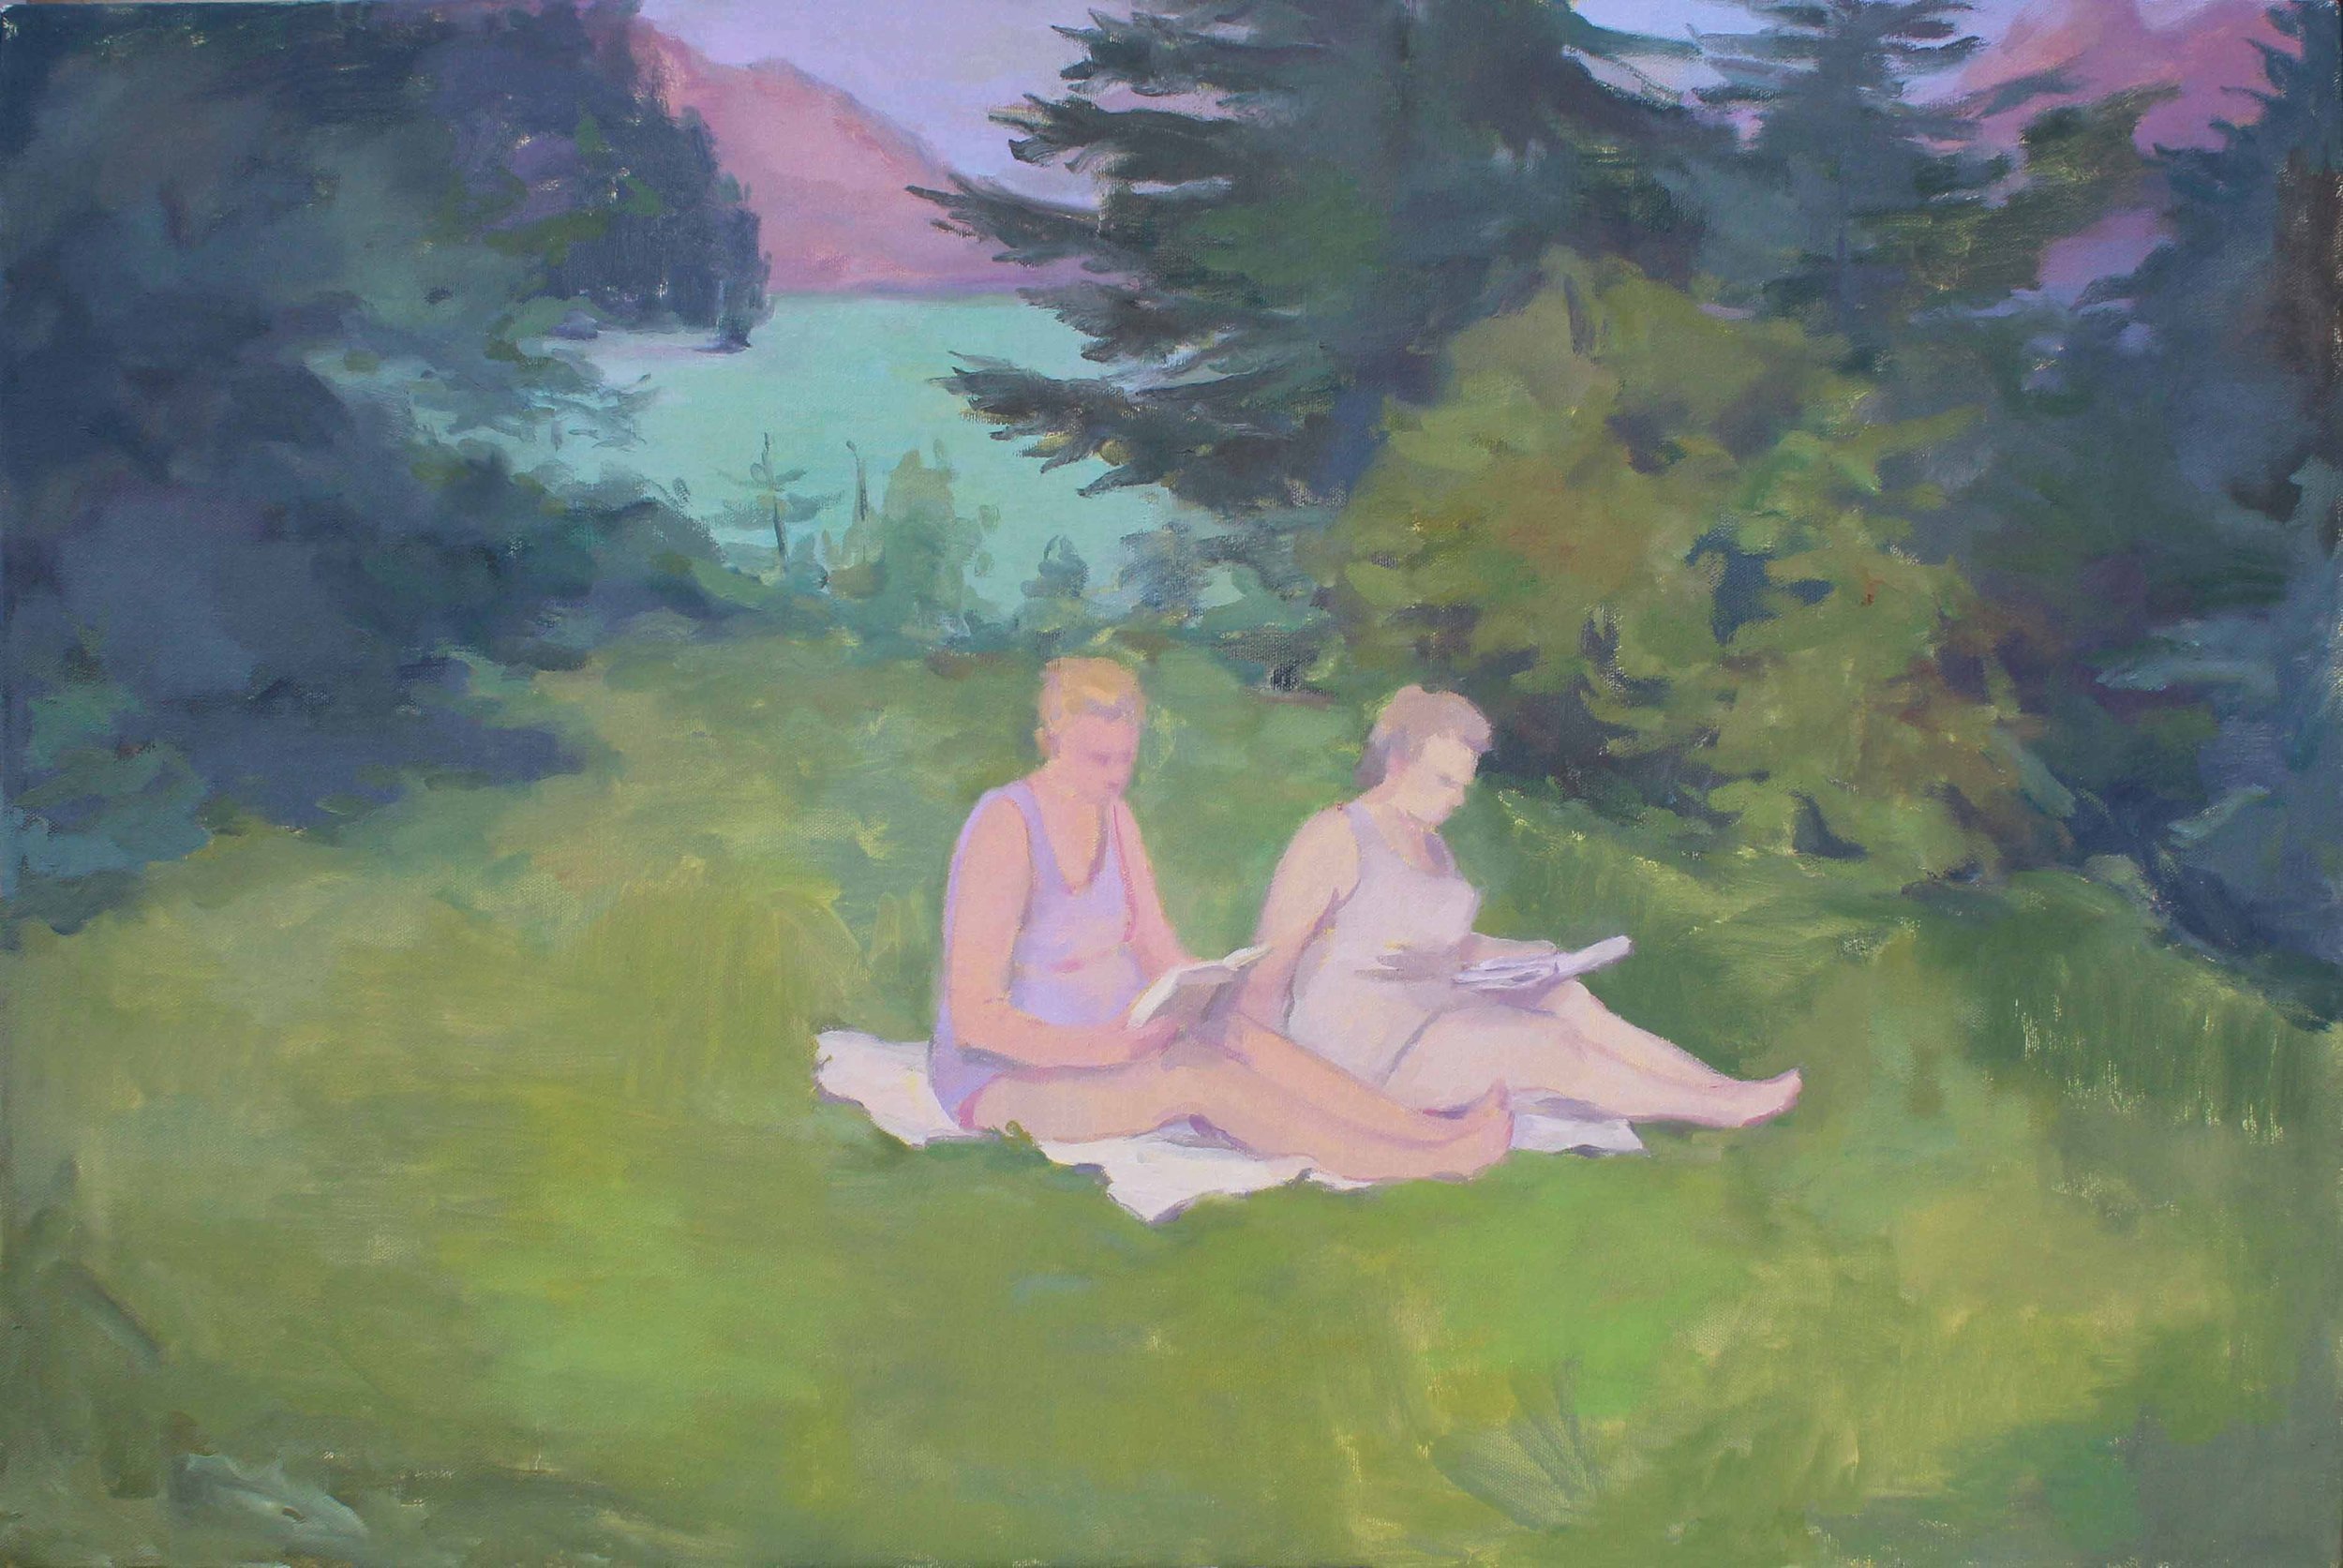    Reading Near the Lake   oil on canvas 20 x 30” 2022   collect this painting  